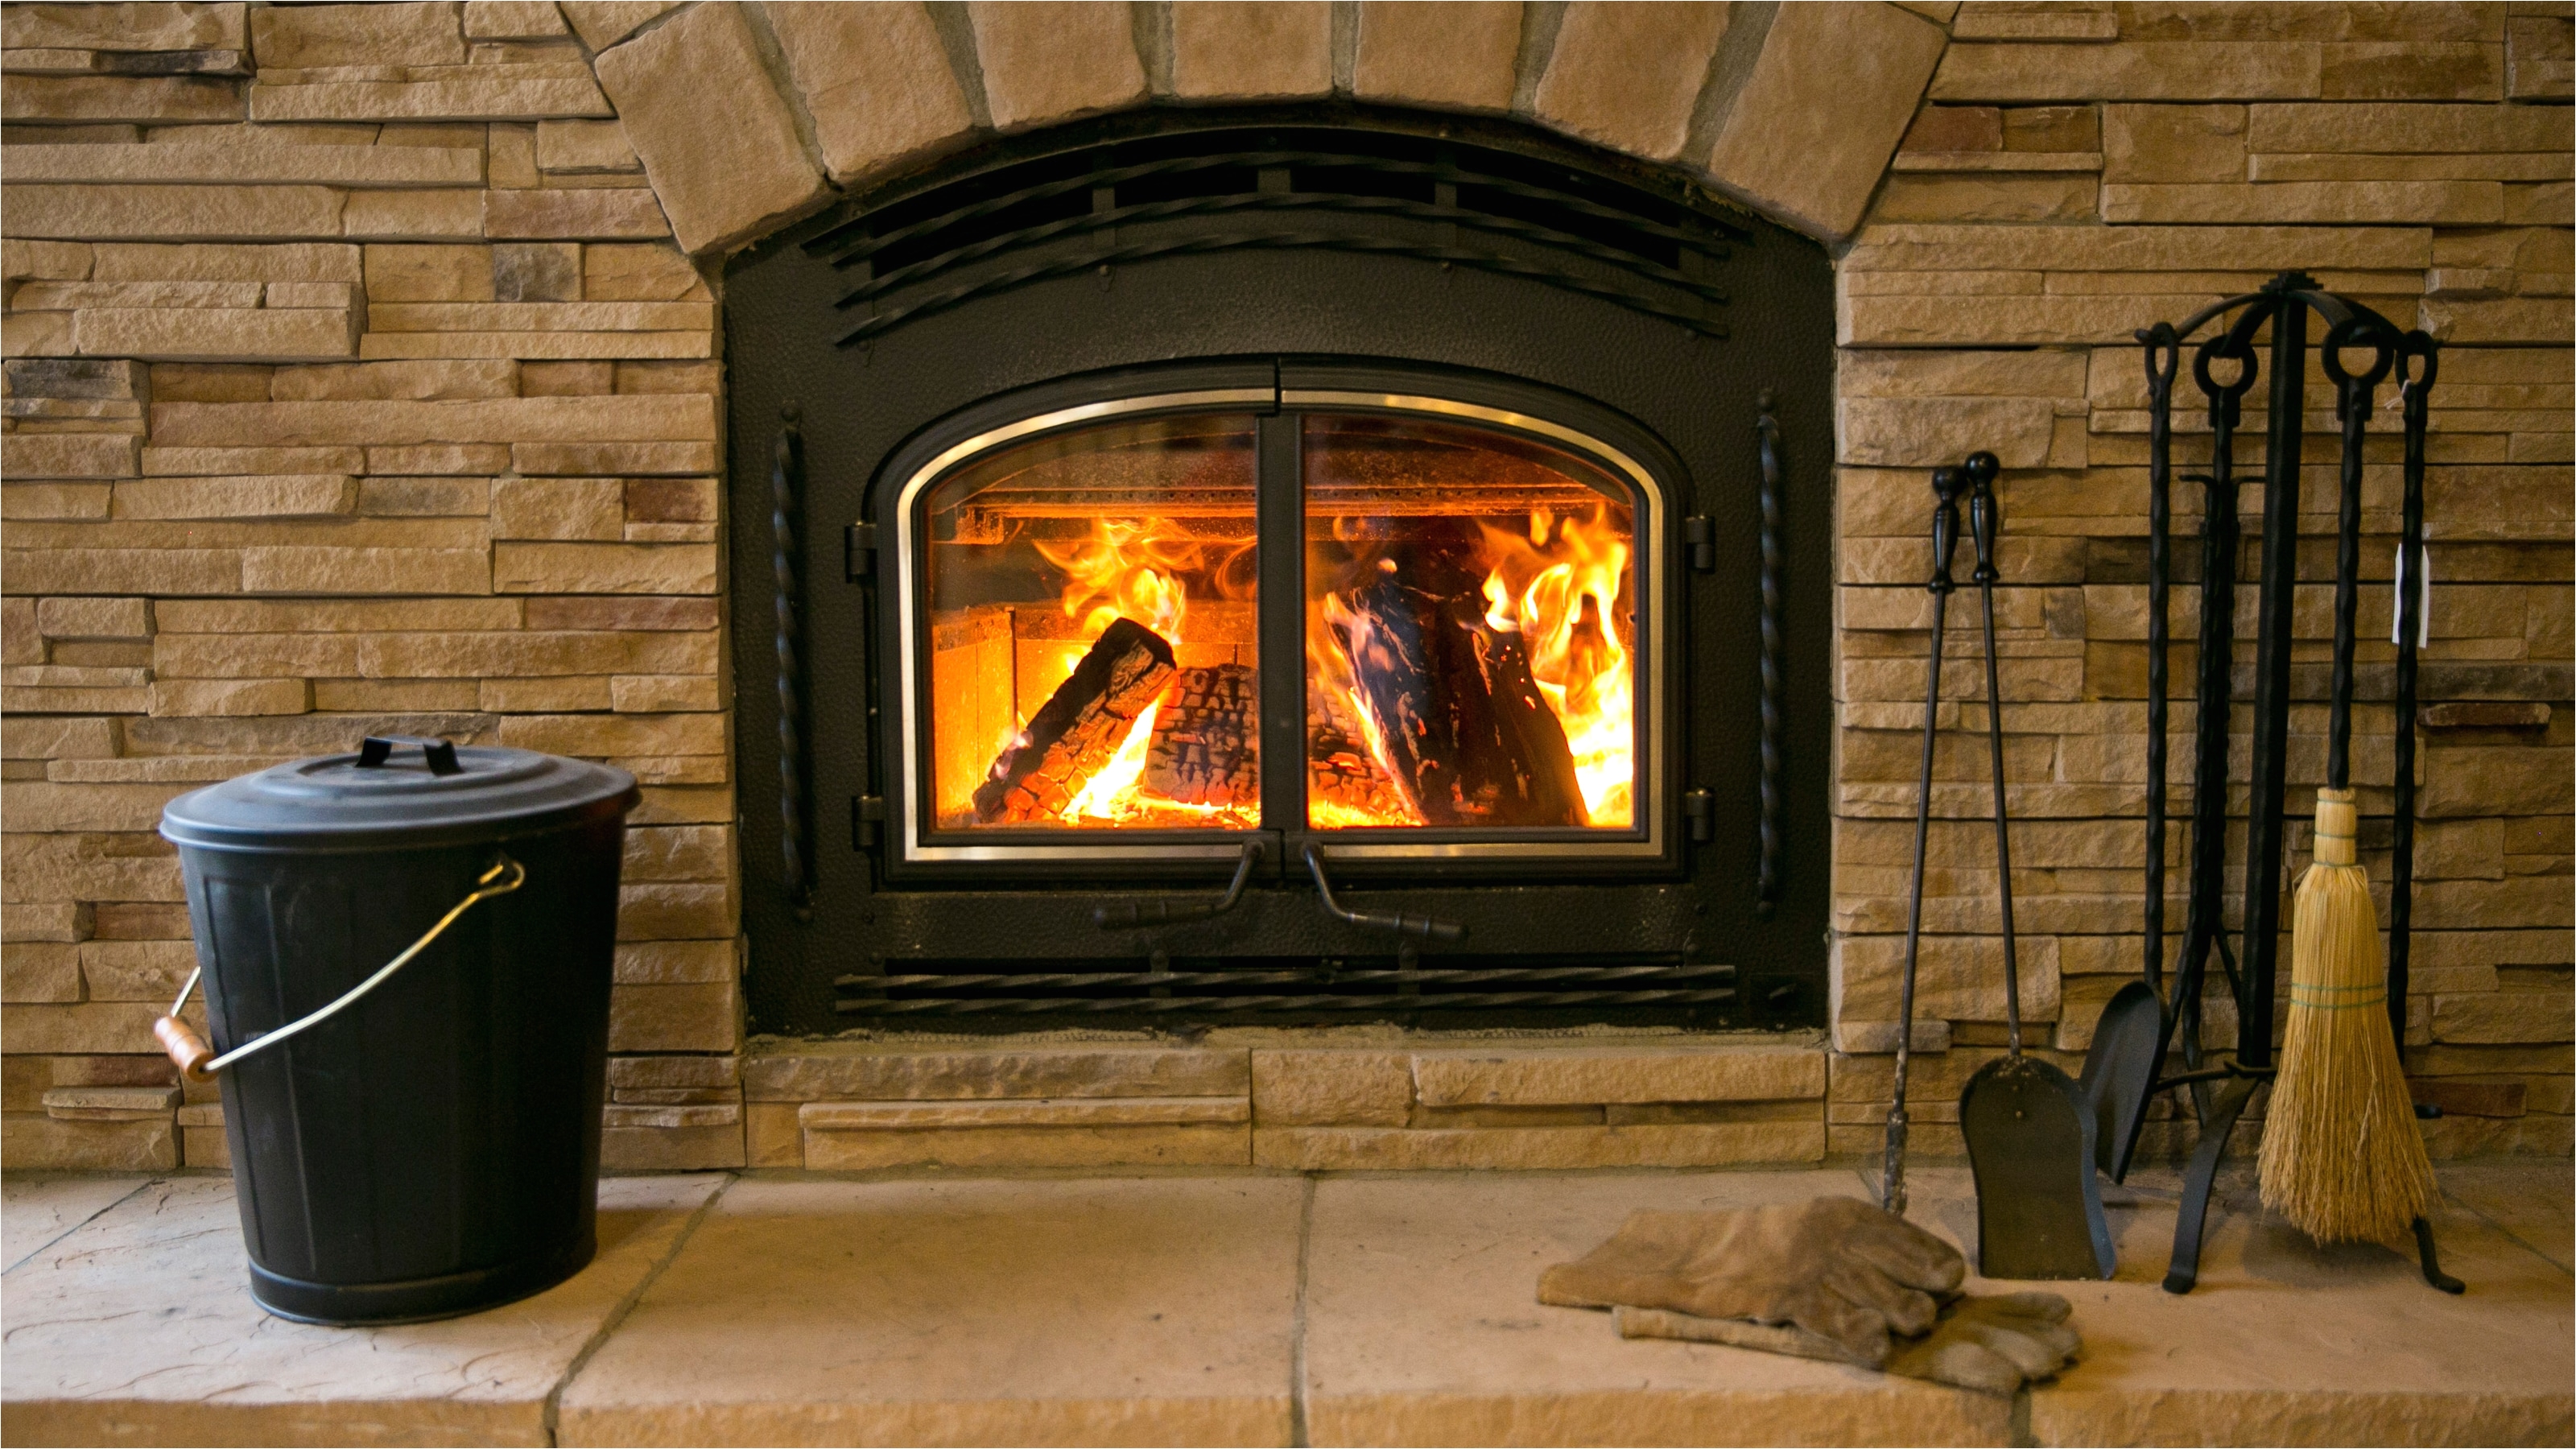 Propane Fireplace Insert Repair How to Convert A Gas Fireplace to Wood Burning Angie S List